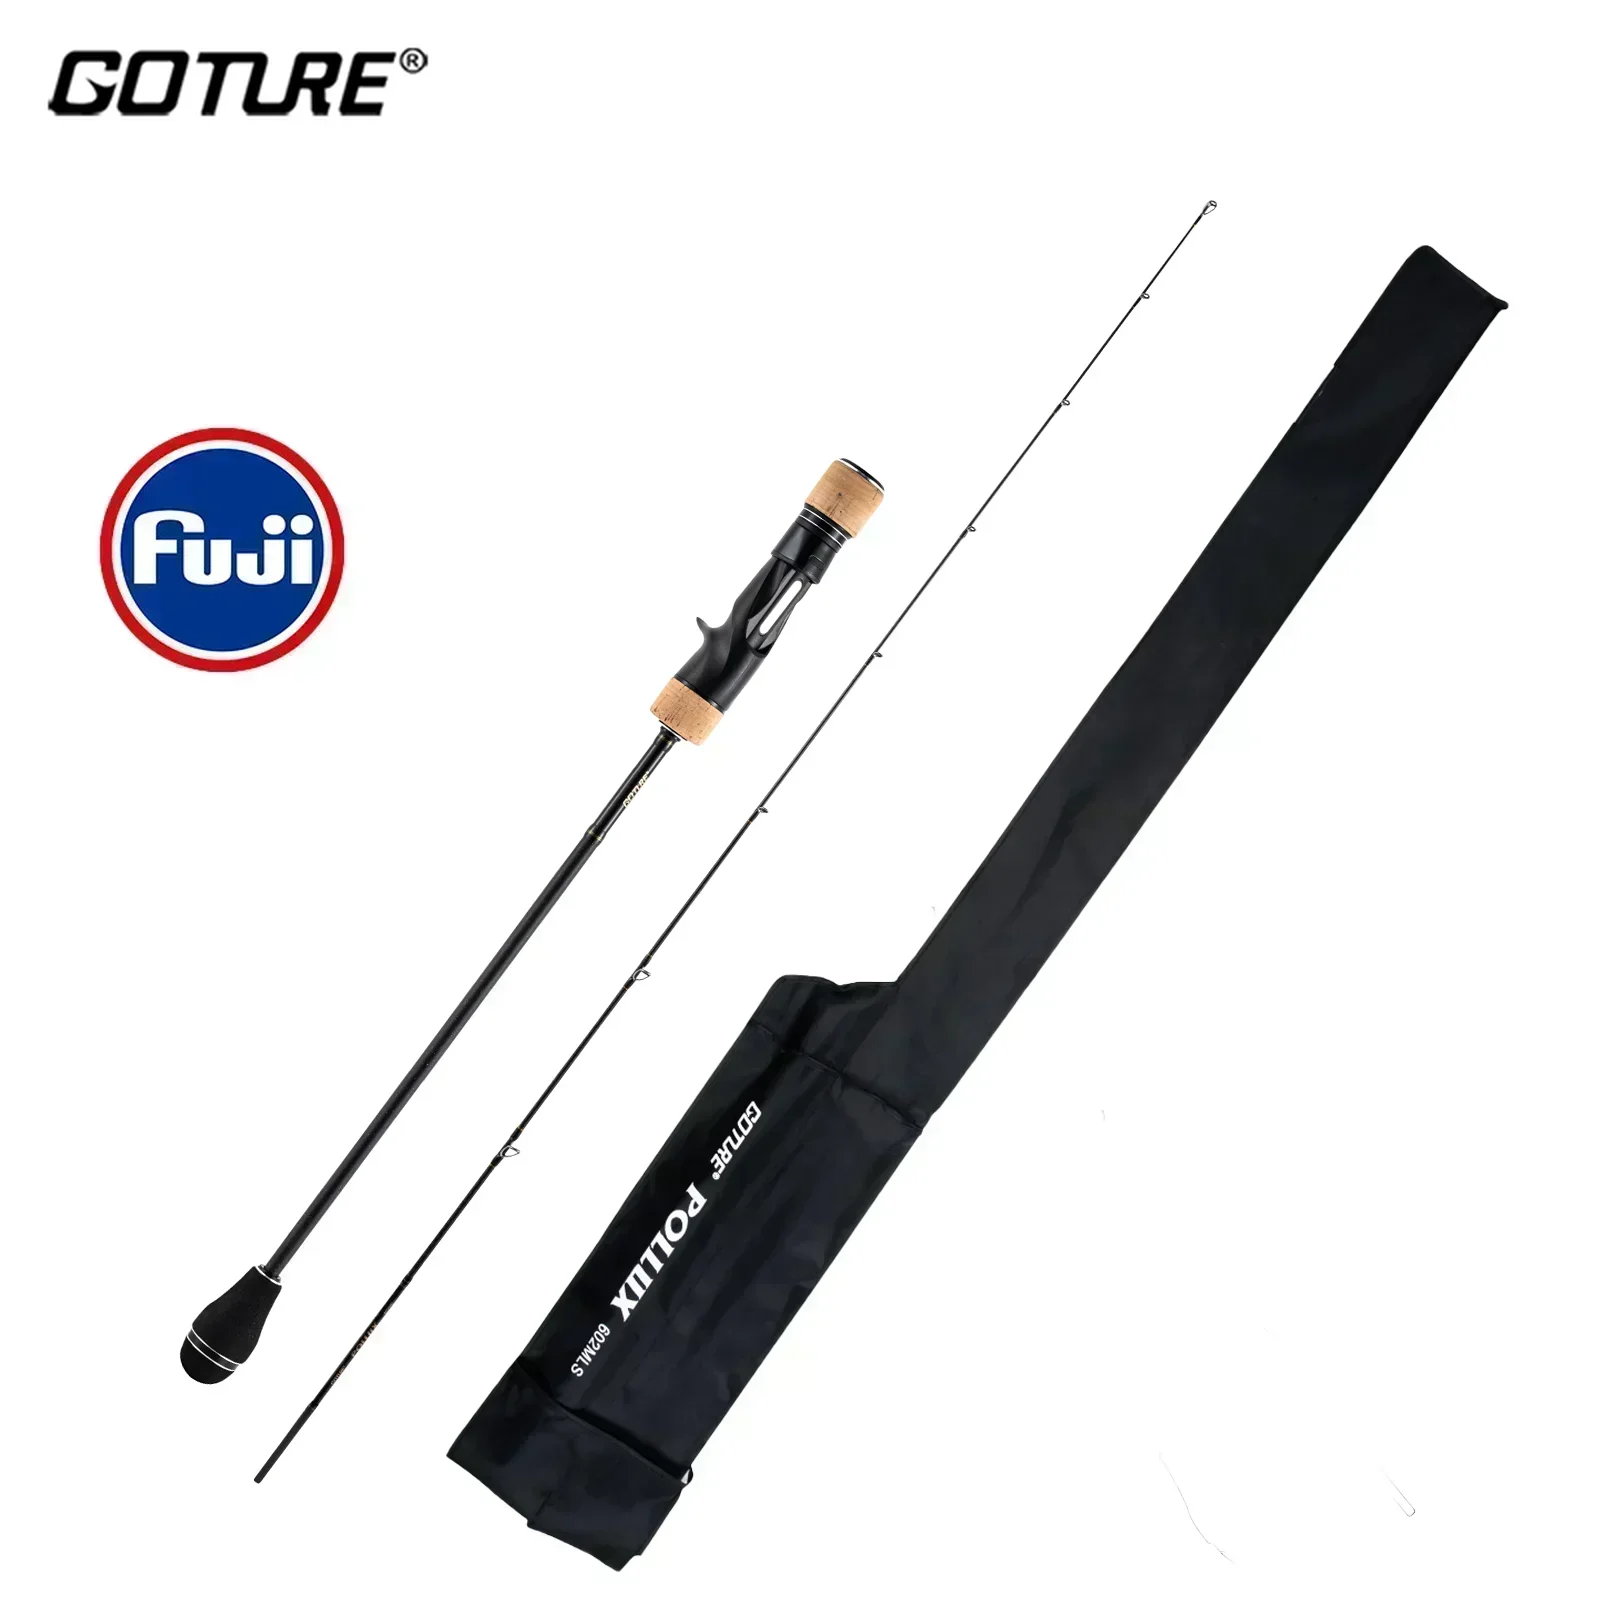 

Goture Pollux 100% Fuji Guide Ring Slow Jigging Rod 1.83m 1.98m Spinning Casting Fishing Rod Lure Max 260g ML M MH Power Sea Rod